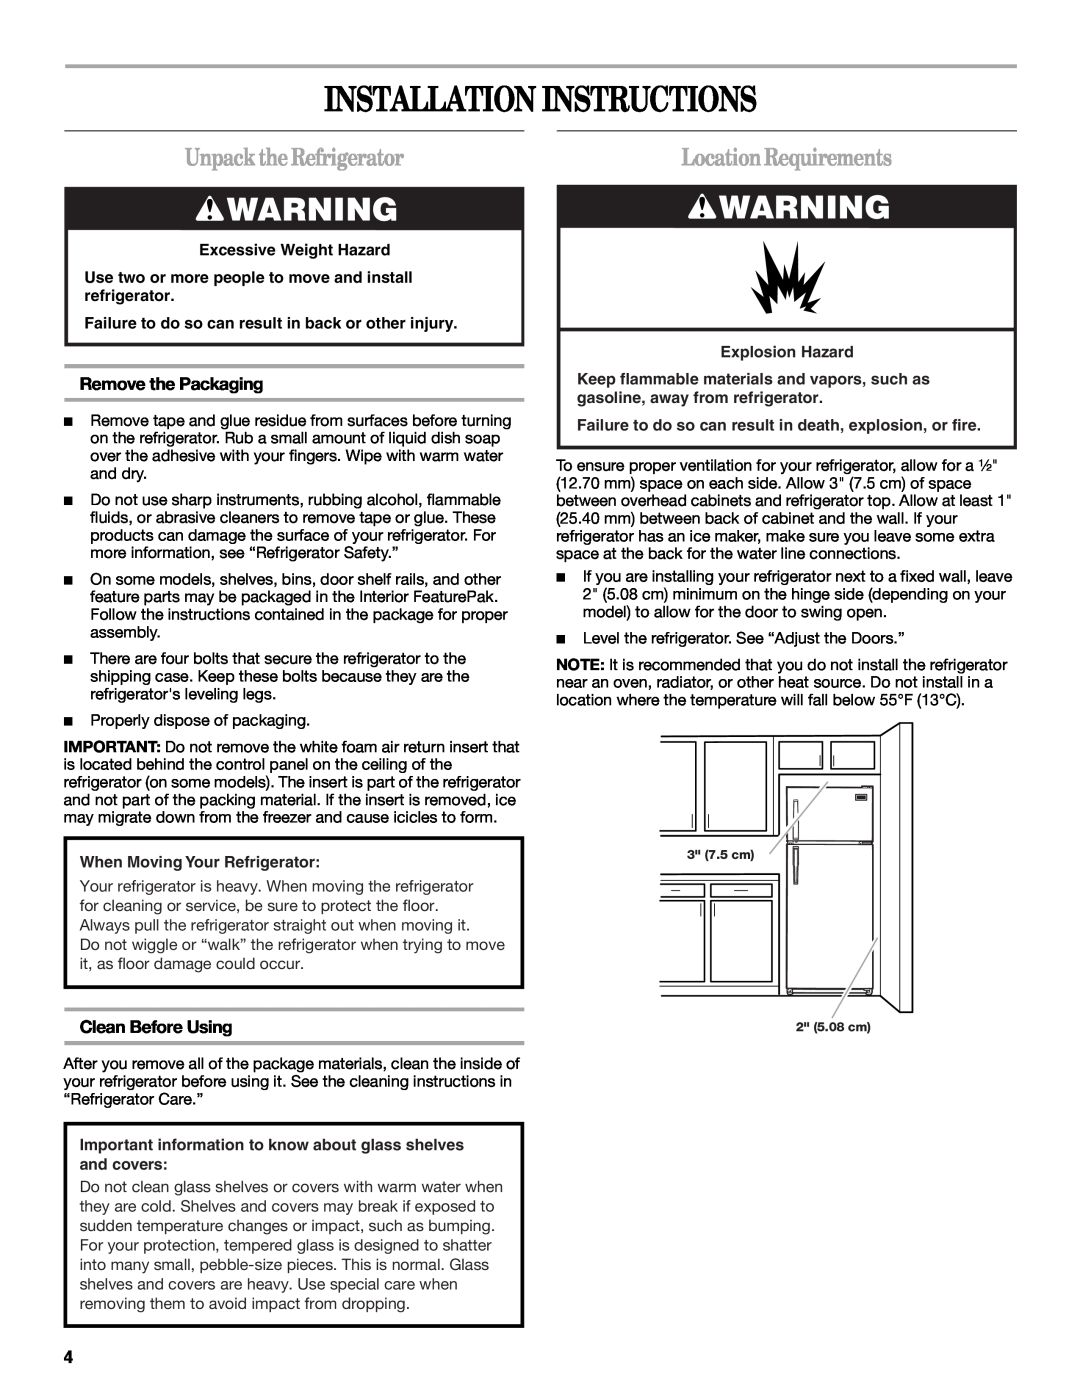 Whirlpool W8TXNWFWT manual Installation Instructions, UnpacktheRefrigerator, LocationRequirements, Remove the Packaging 